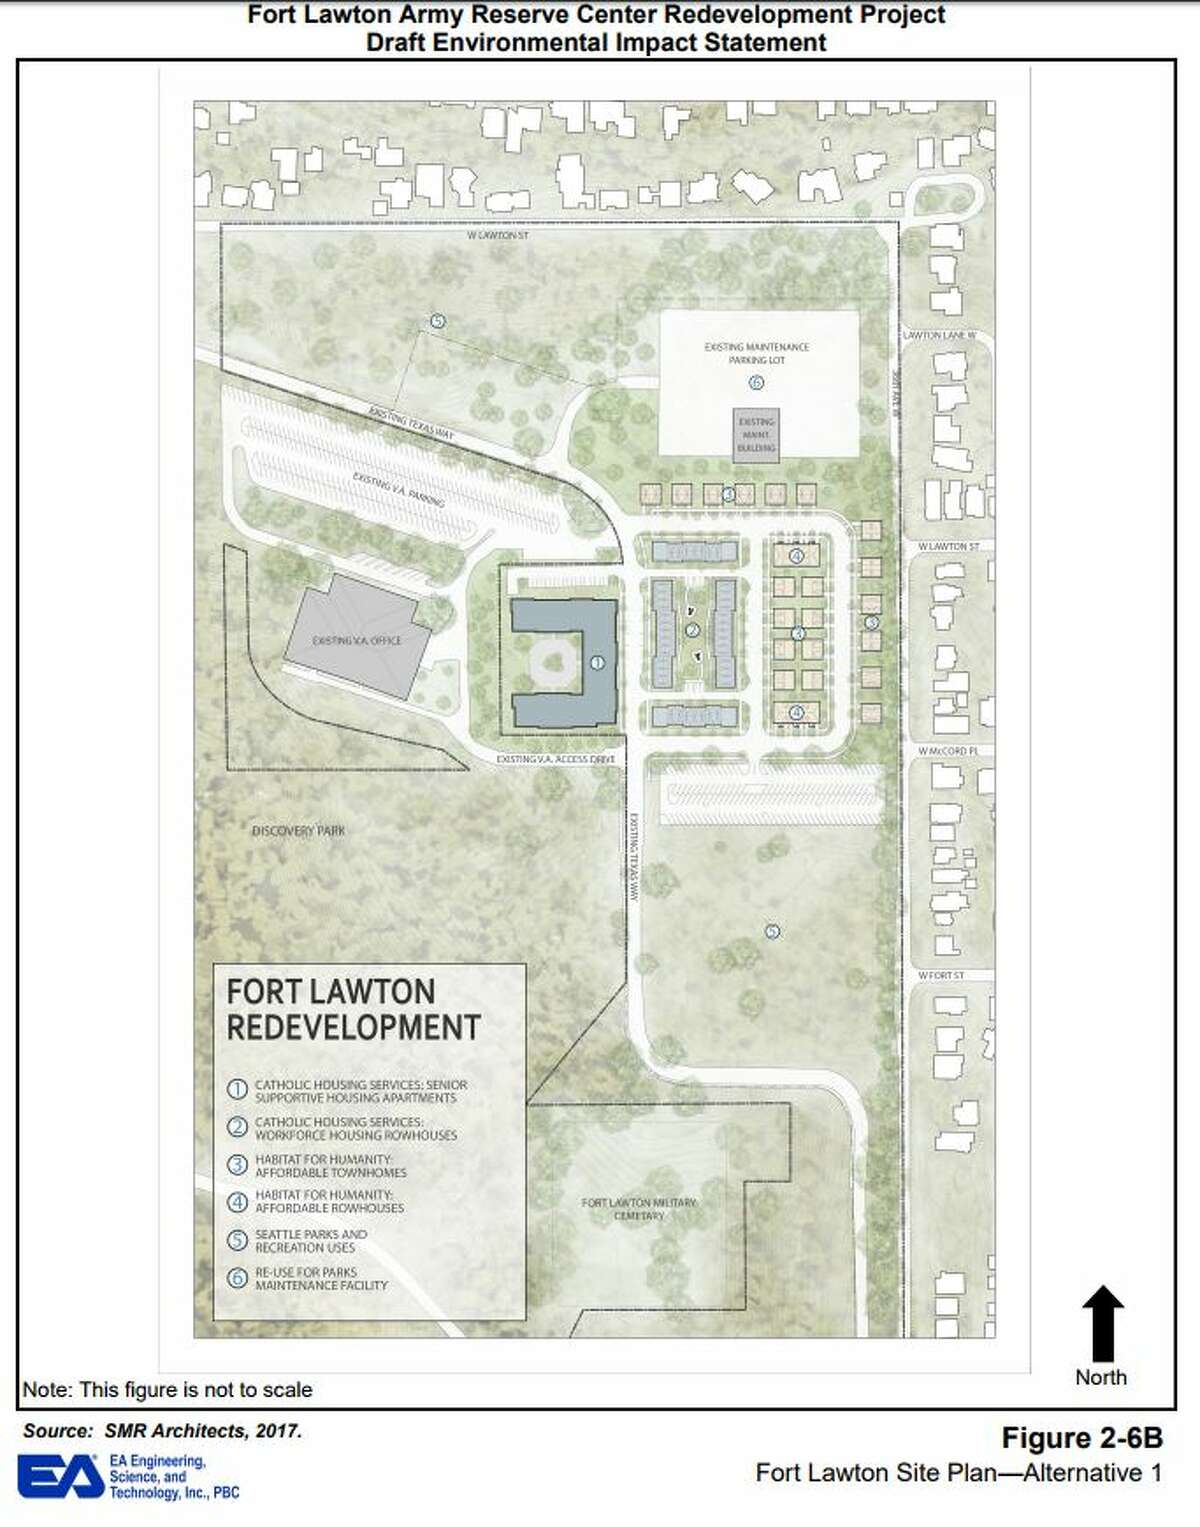 Maps and images from the city of Seattle's draft environmental impact statement for Fort Lawton redevelopment.